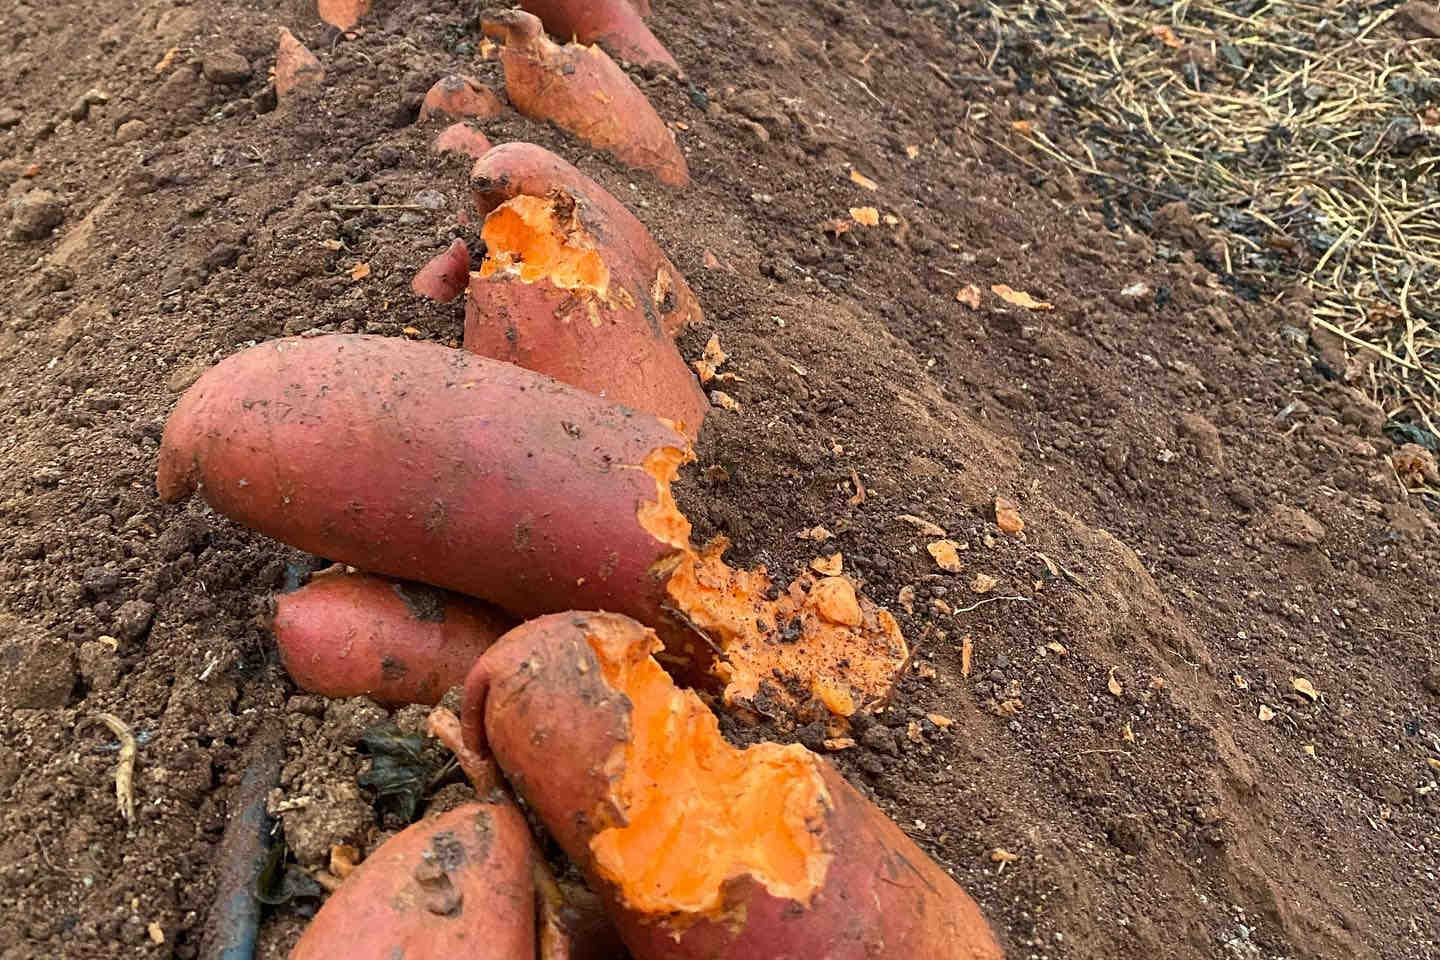 Sweet potatoes damaged by birds (source: Oztech Drones)